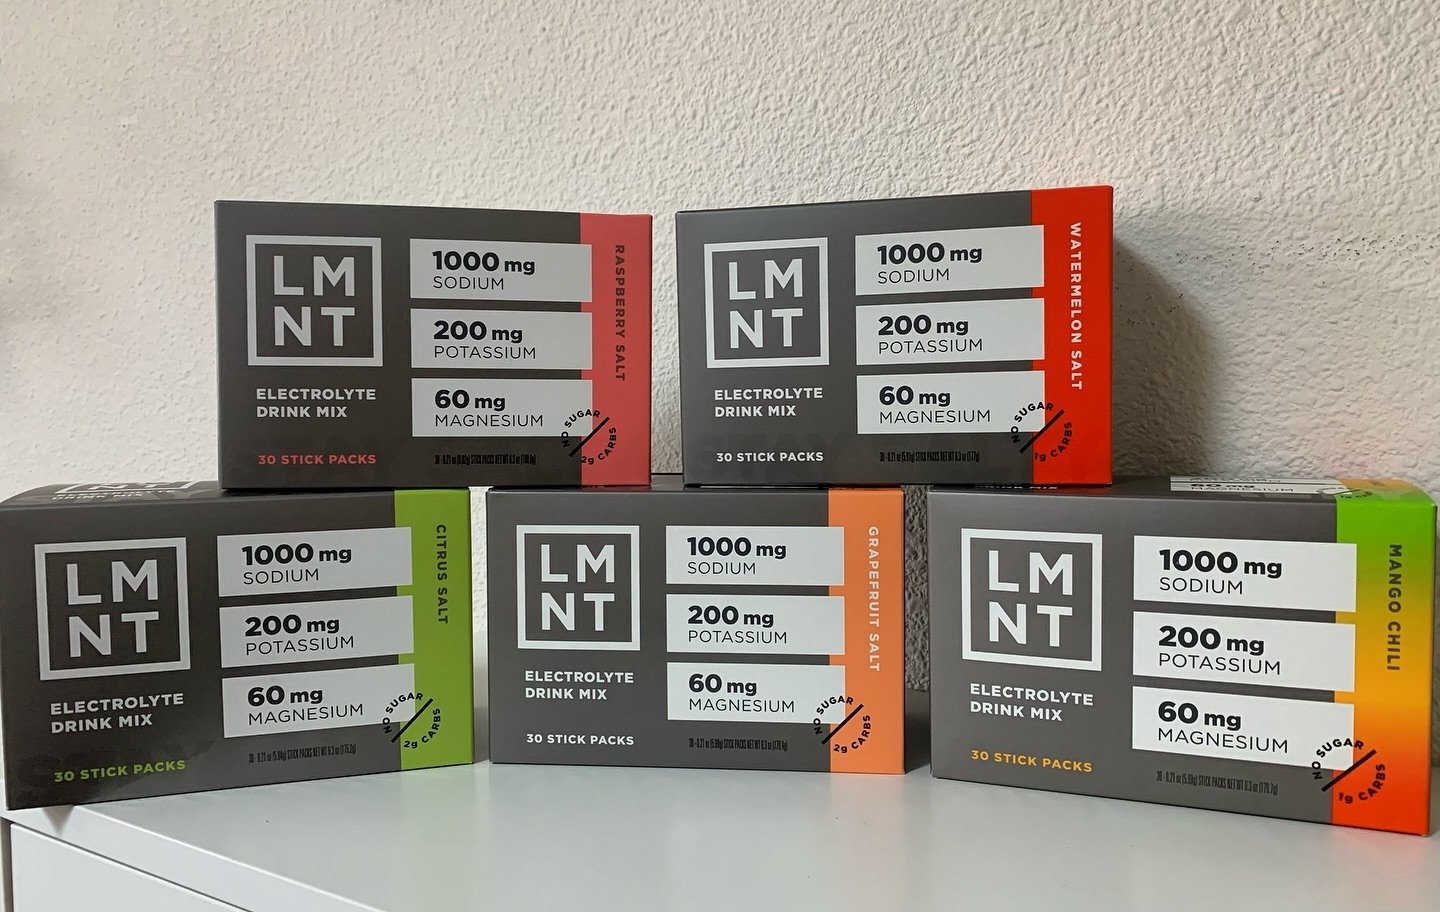 We&rsquo;ve got some new @drinklmnt flavors in stock! Get yours while supplies last 🧂 🍉🍋&zwj;🟩🥭🌶️ 💦